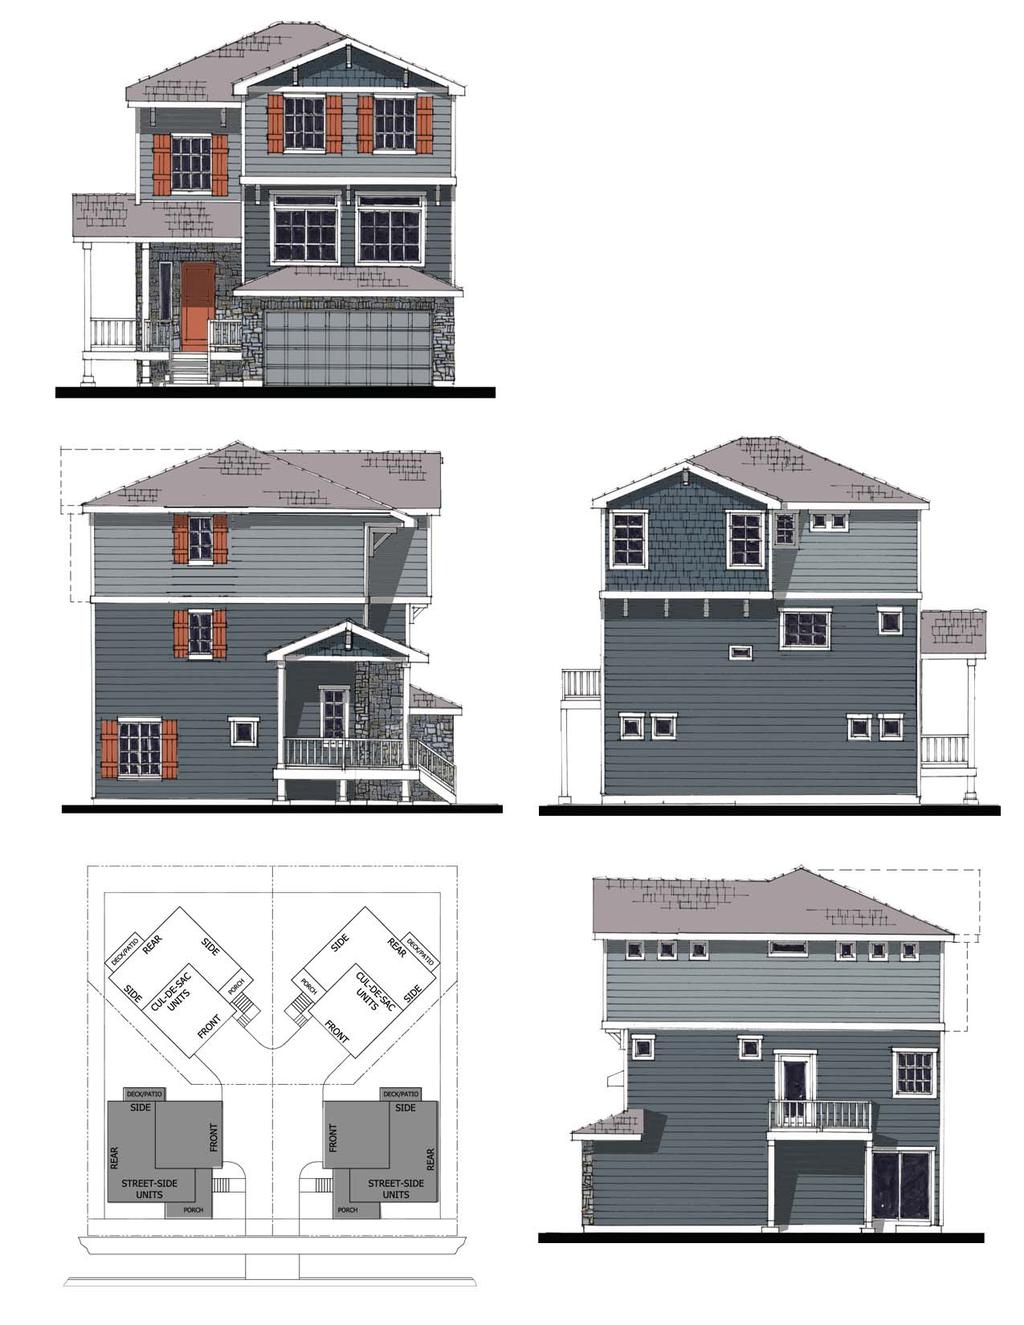 COMPOSITION ROOFING SINGLE SHAKE SIDING SHUTTERS ON AT LEAST 2 WINDOWS WRAP AROUND THREE STORY STREET-SIDE ELEVATION EXHIBIT: E.2 15% MASONRY FRONT WINDOW AREA MIN.